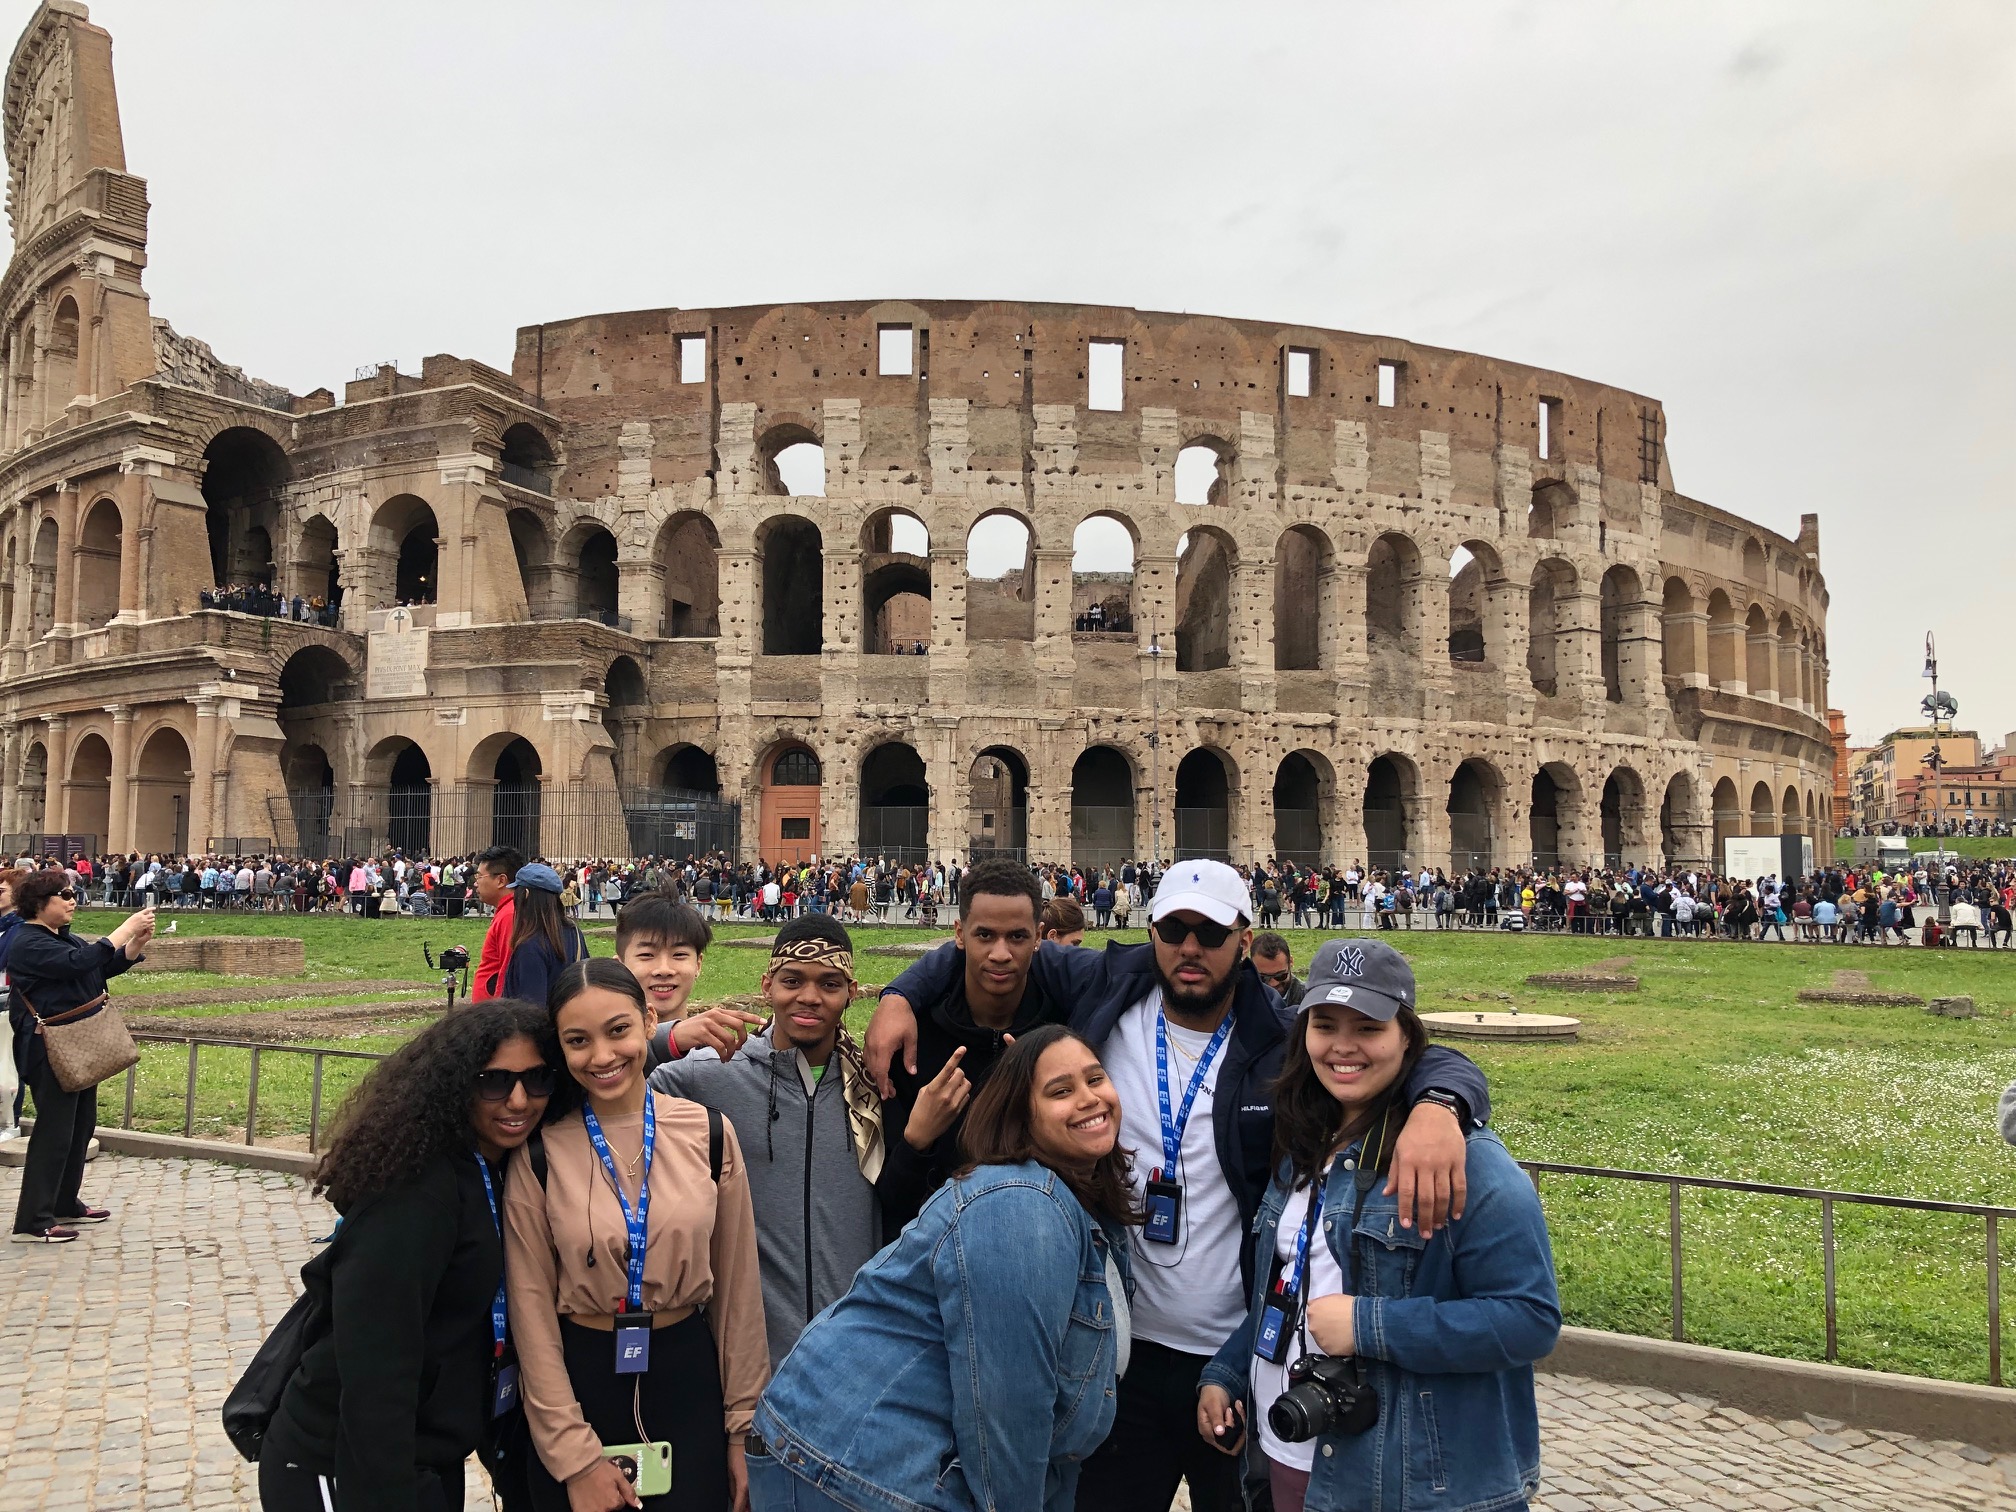 group of students poses in front of Coliseum in Rome